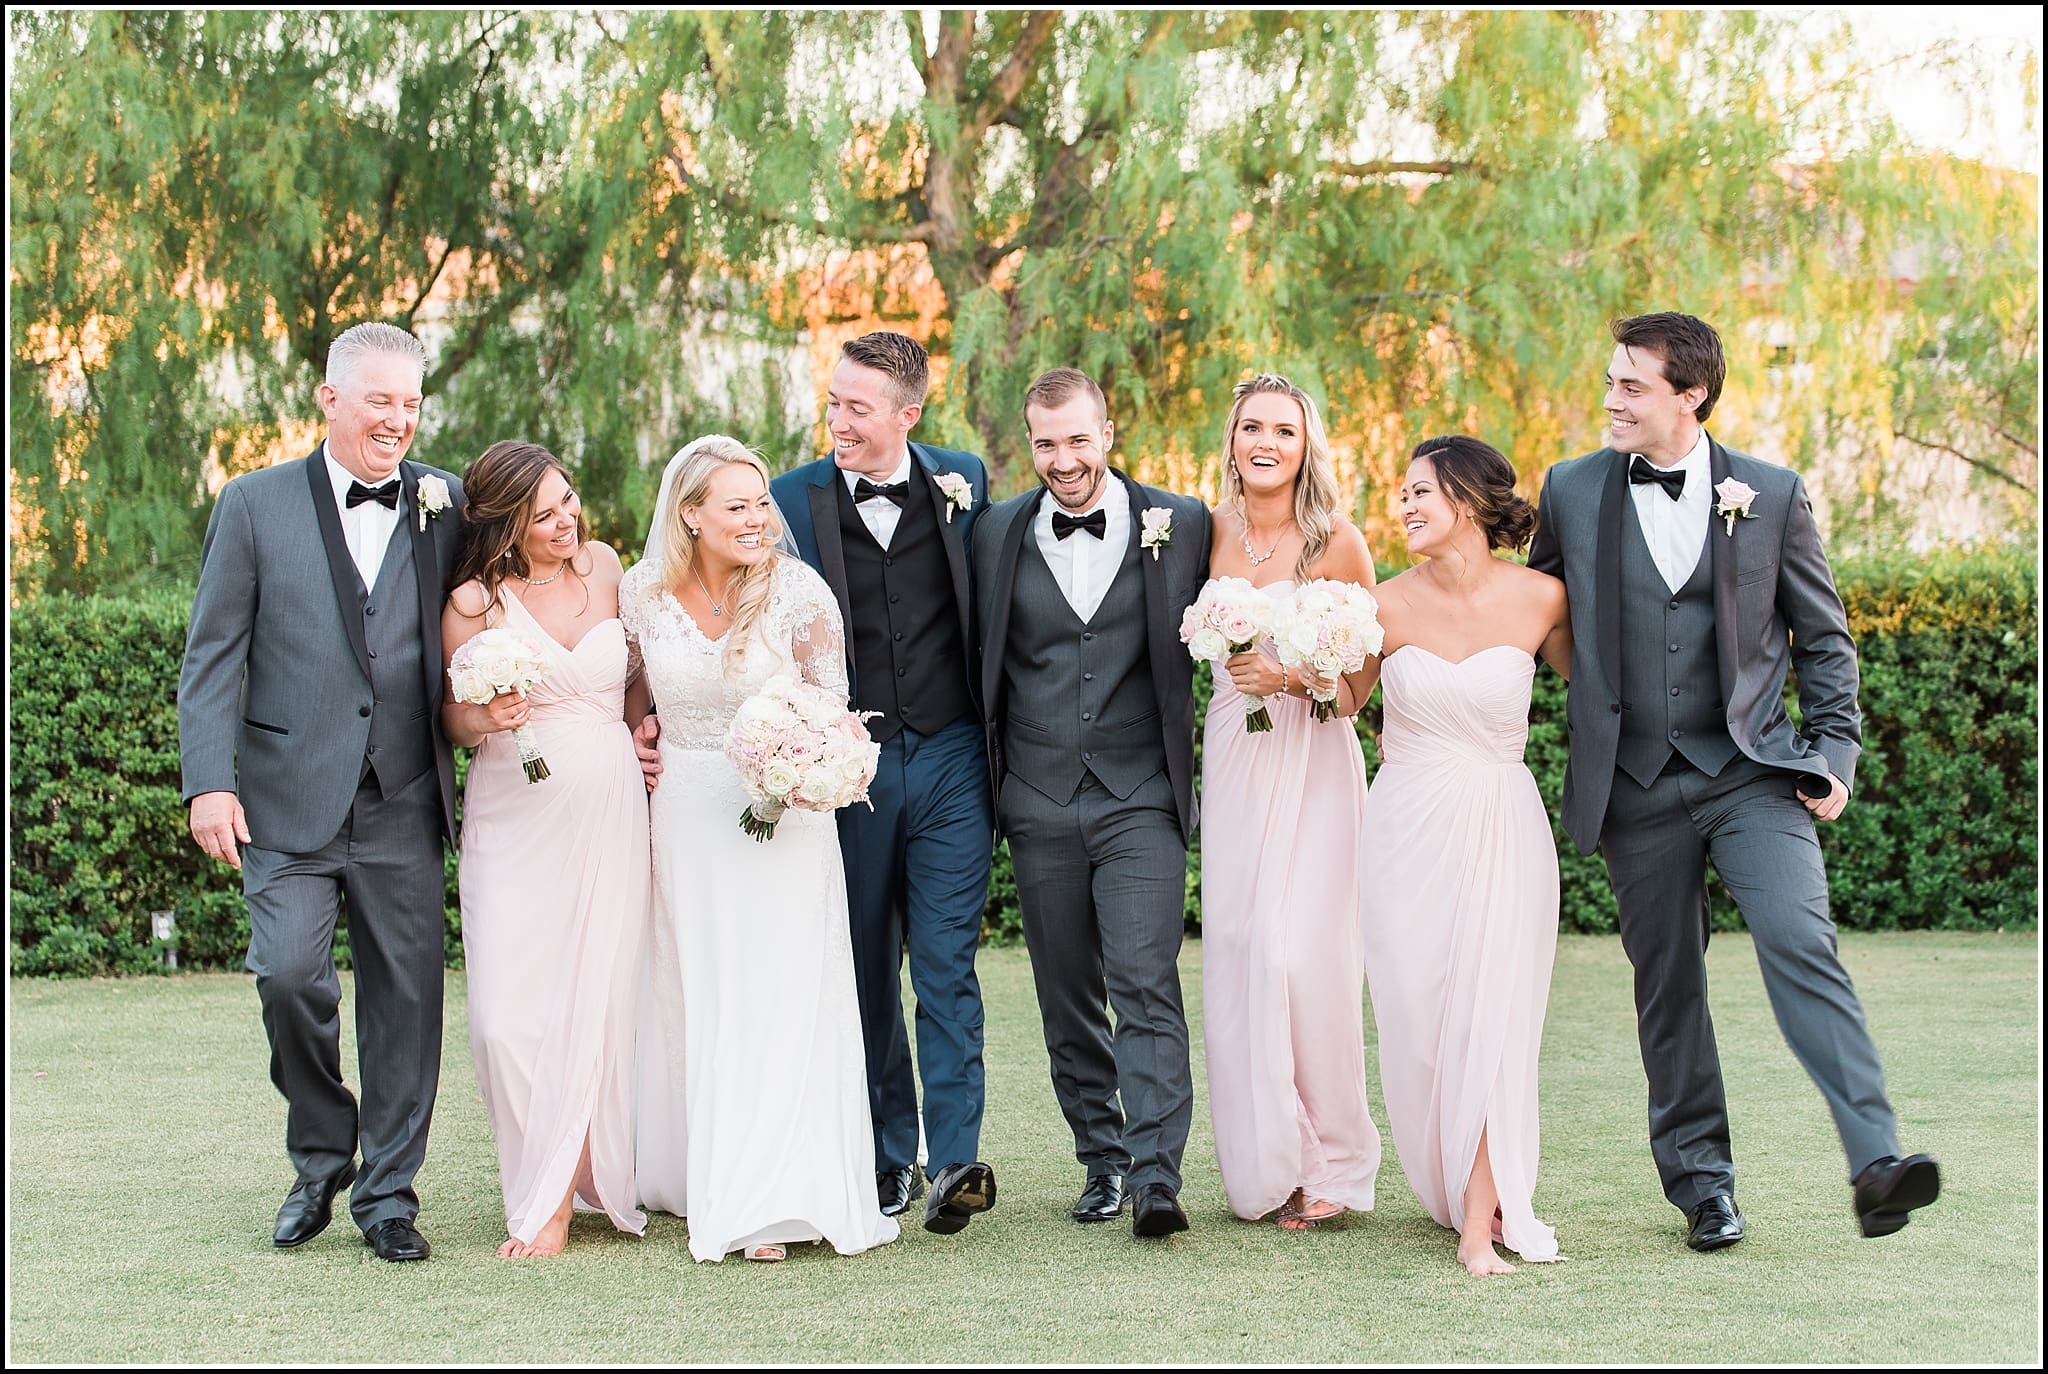  favorite wedding images 2016, wedding photos from 2016, our favorite wedding photos, yorba linda wedding, black gold golf club wedding, pink and gray wedding party